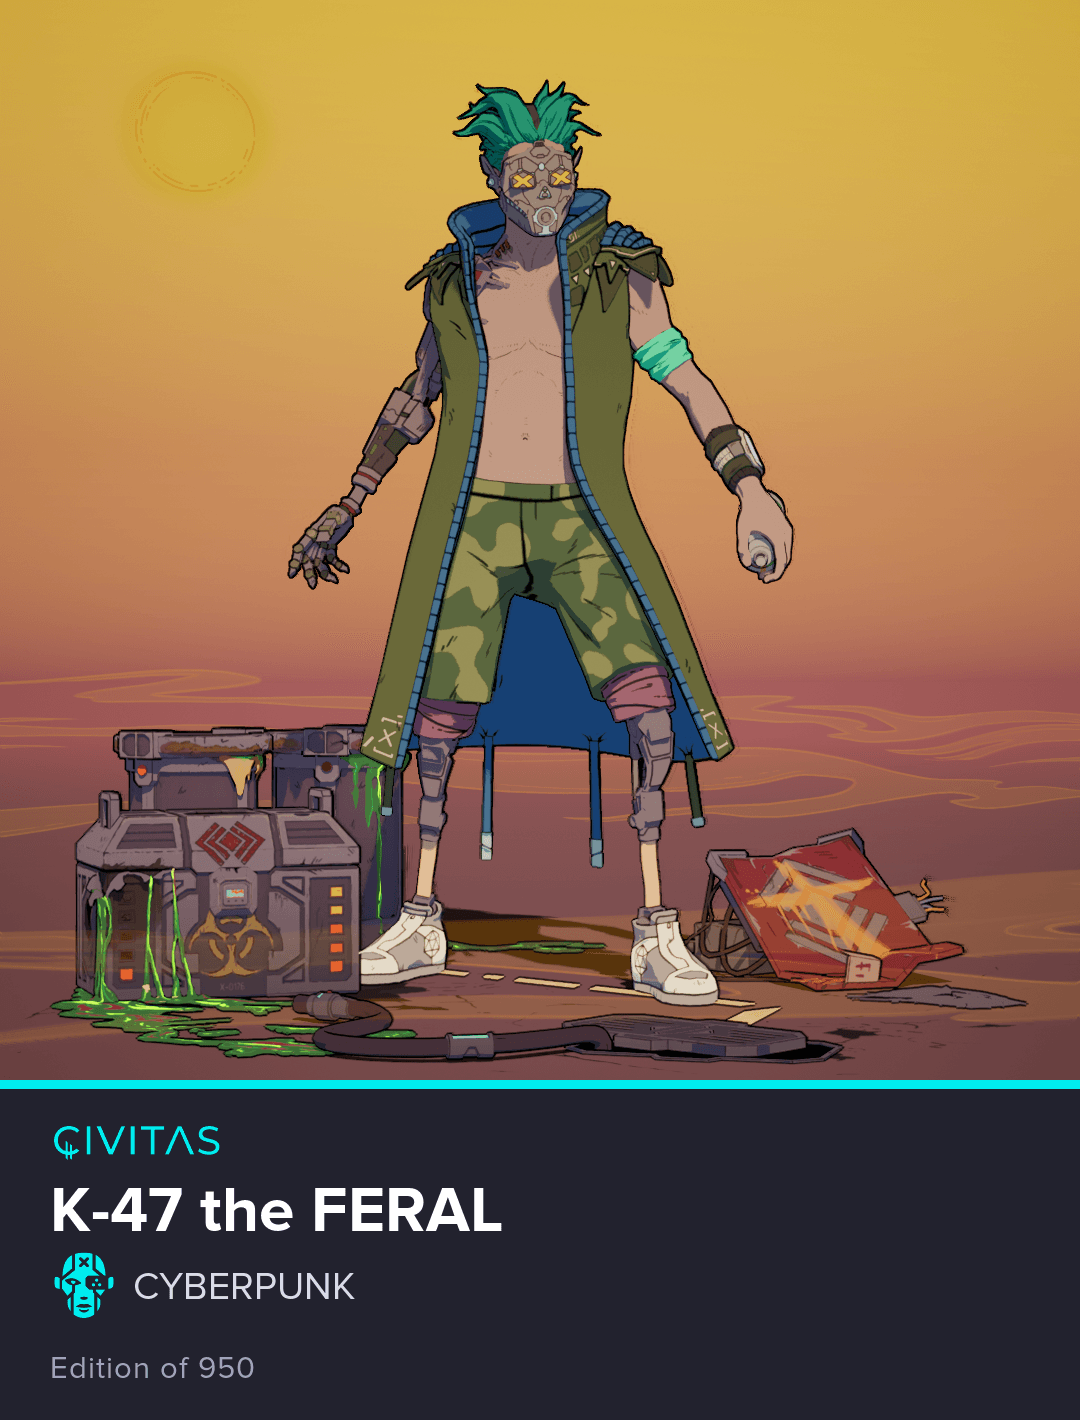 K-47 the Feral #343